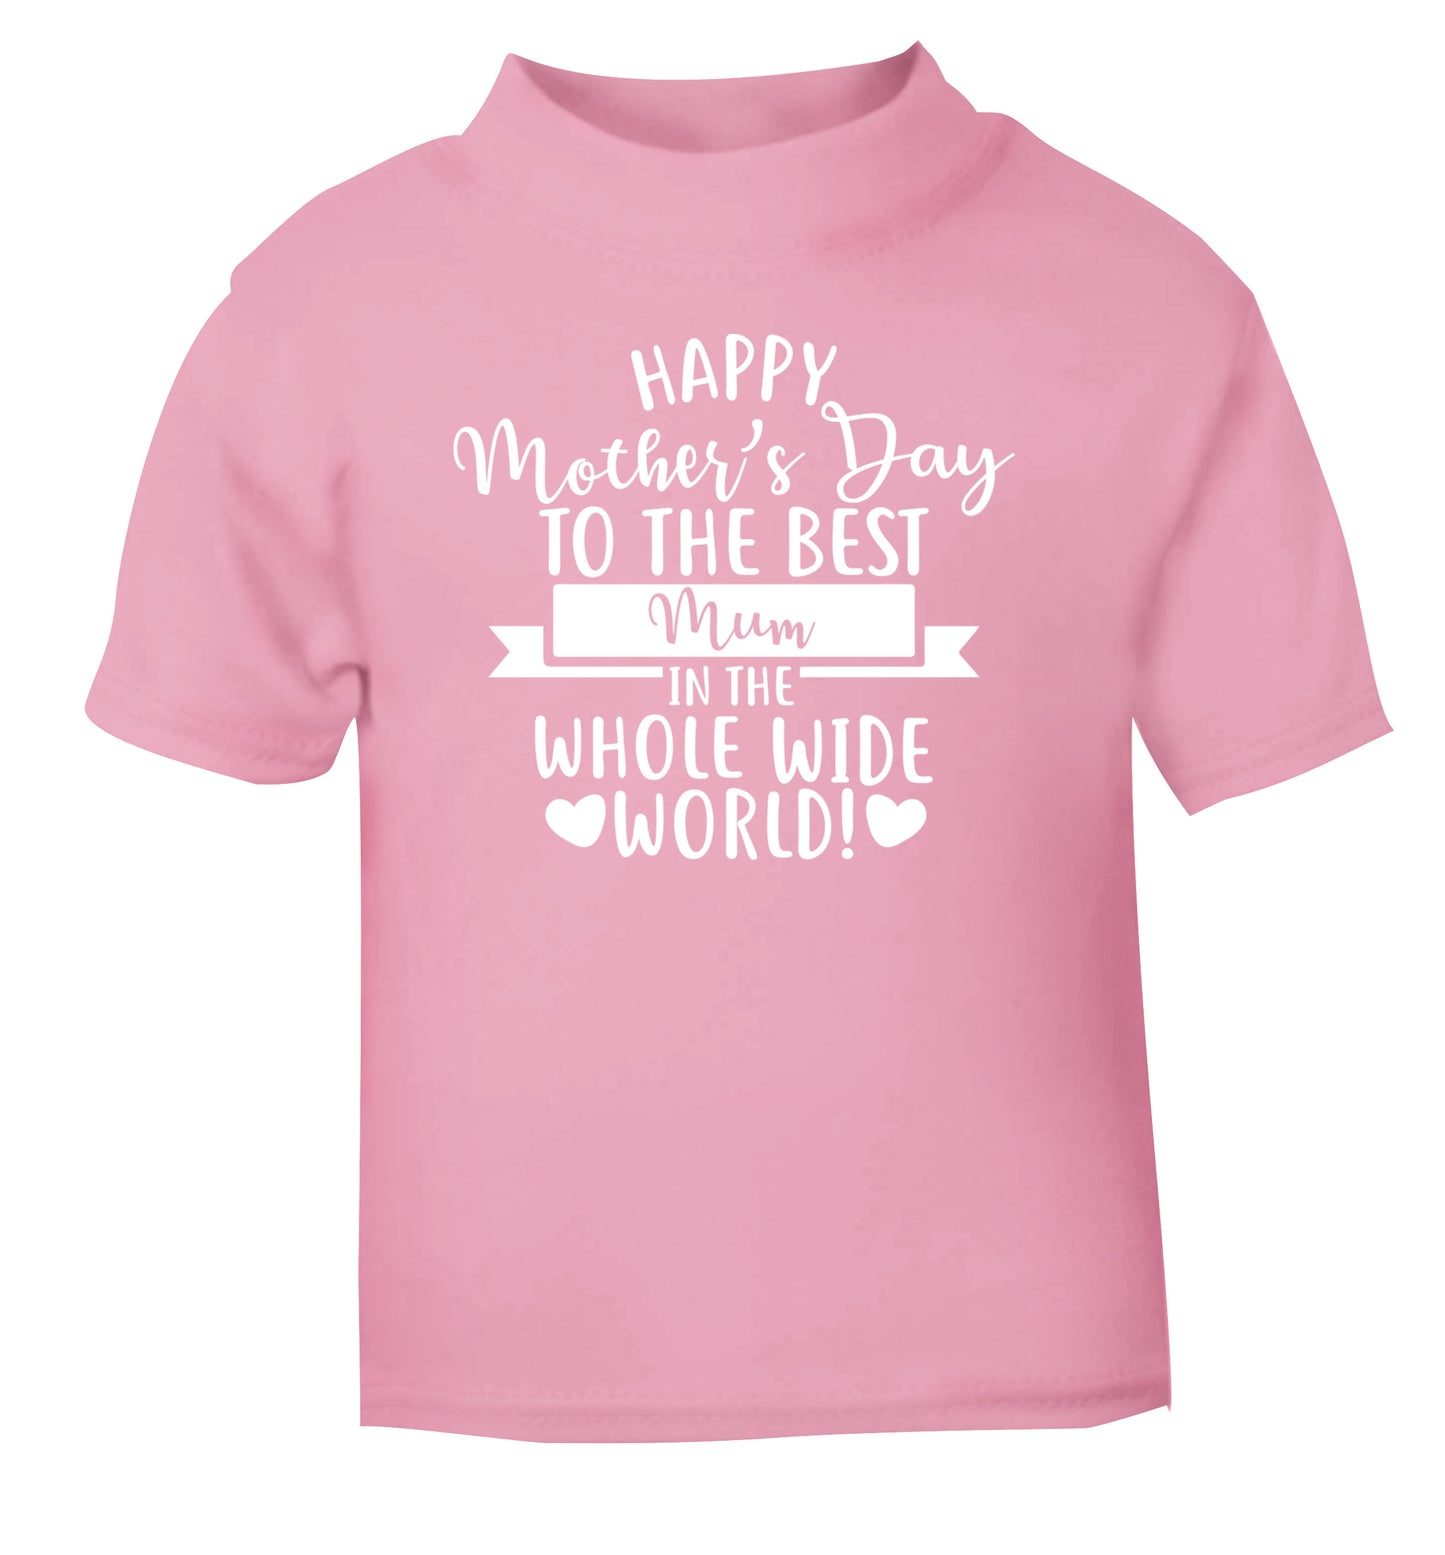 Happy Mother's Day to the best mum in the whole wide world! light pink Baby Toddler Tshirt 2 Years